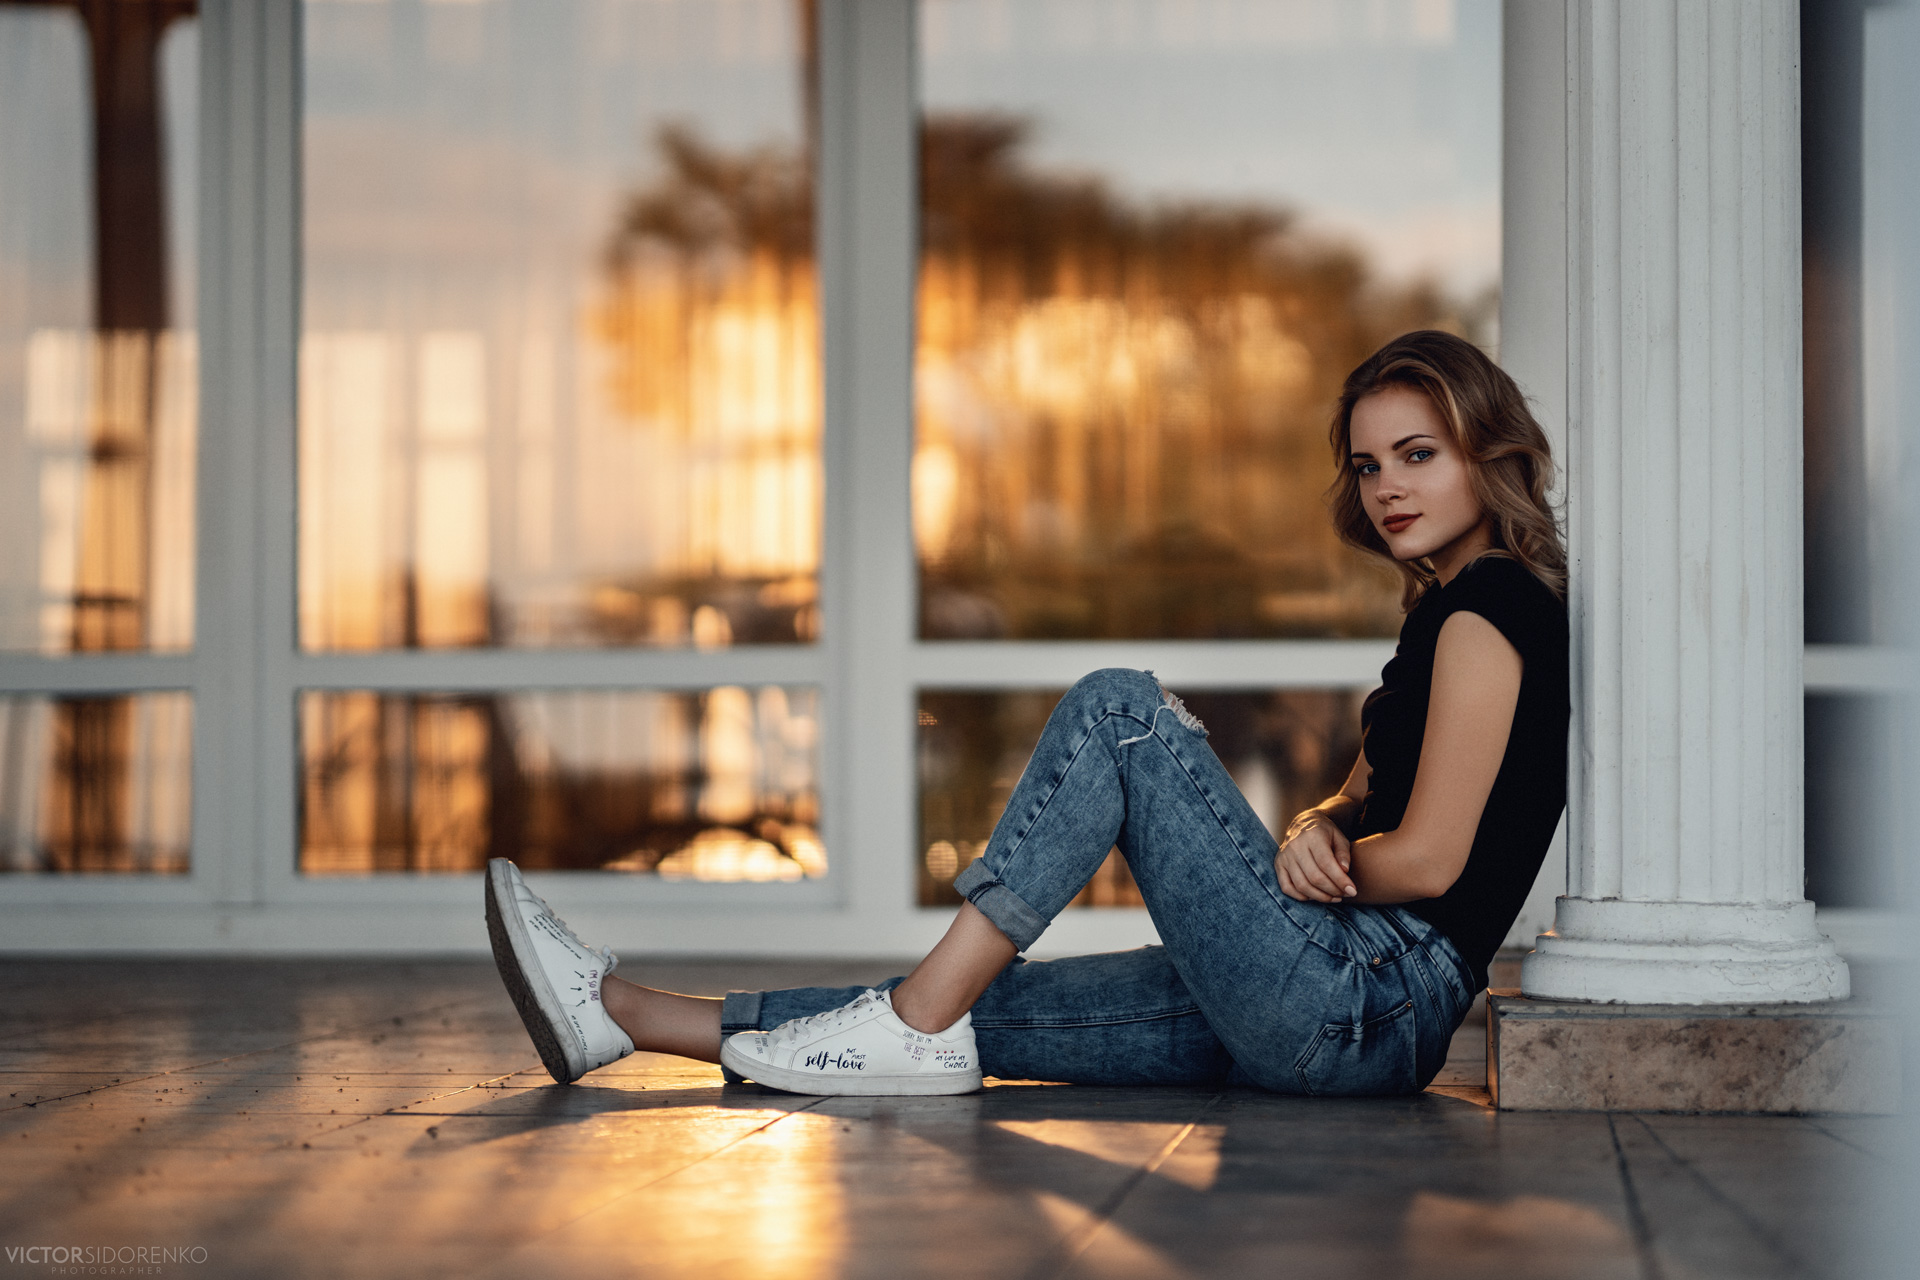 People 1920x1280 women model blonde looking at viewer red lipstick T-shirt jeans torn jeans sneakers sitting side view smiling pillar depth of field portrait outdoors women outdoors Victor Sidorenko